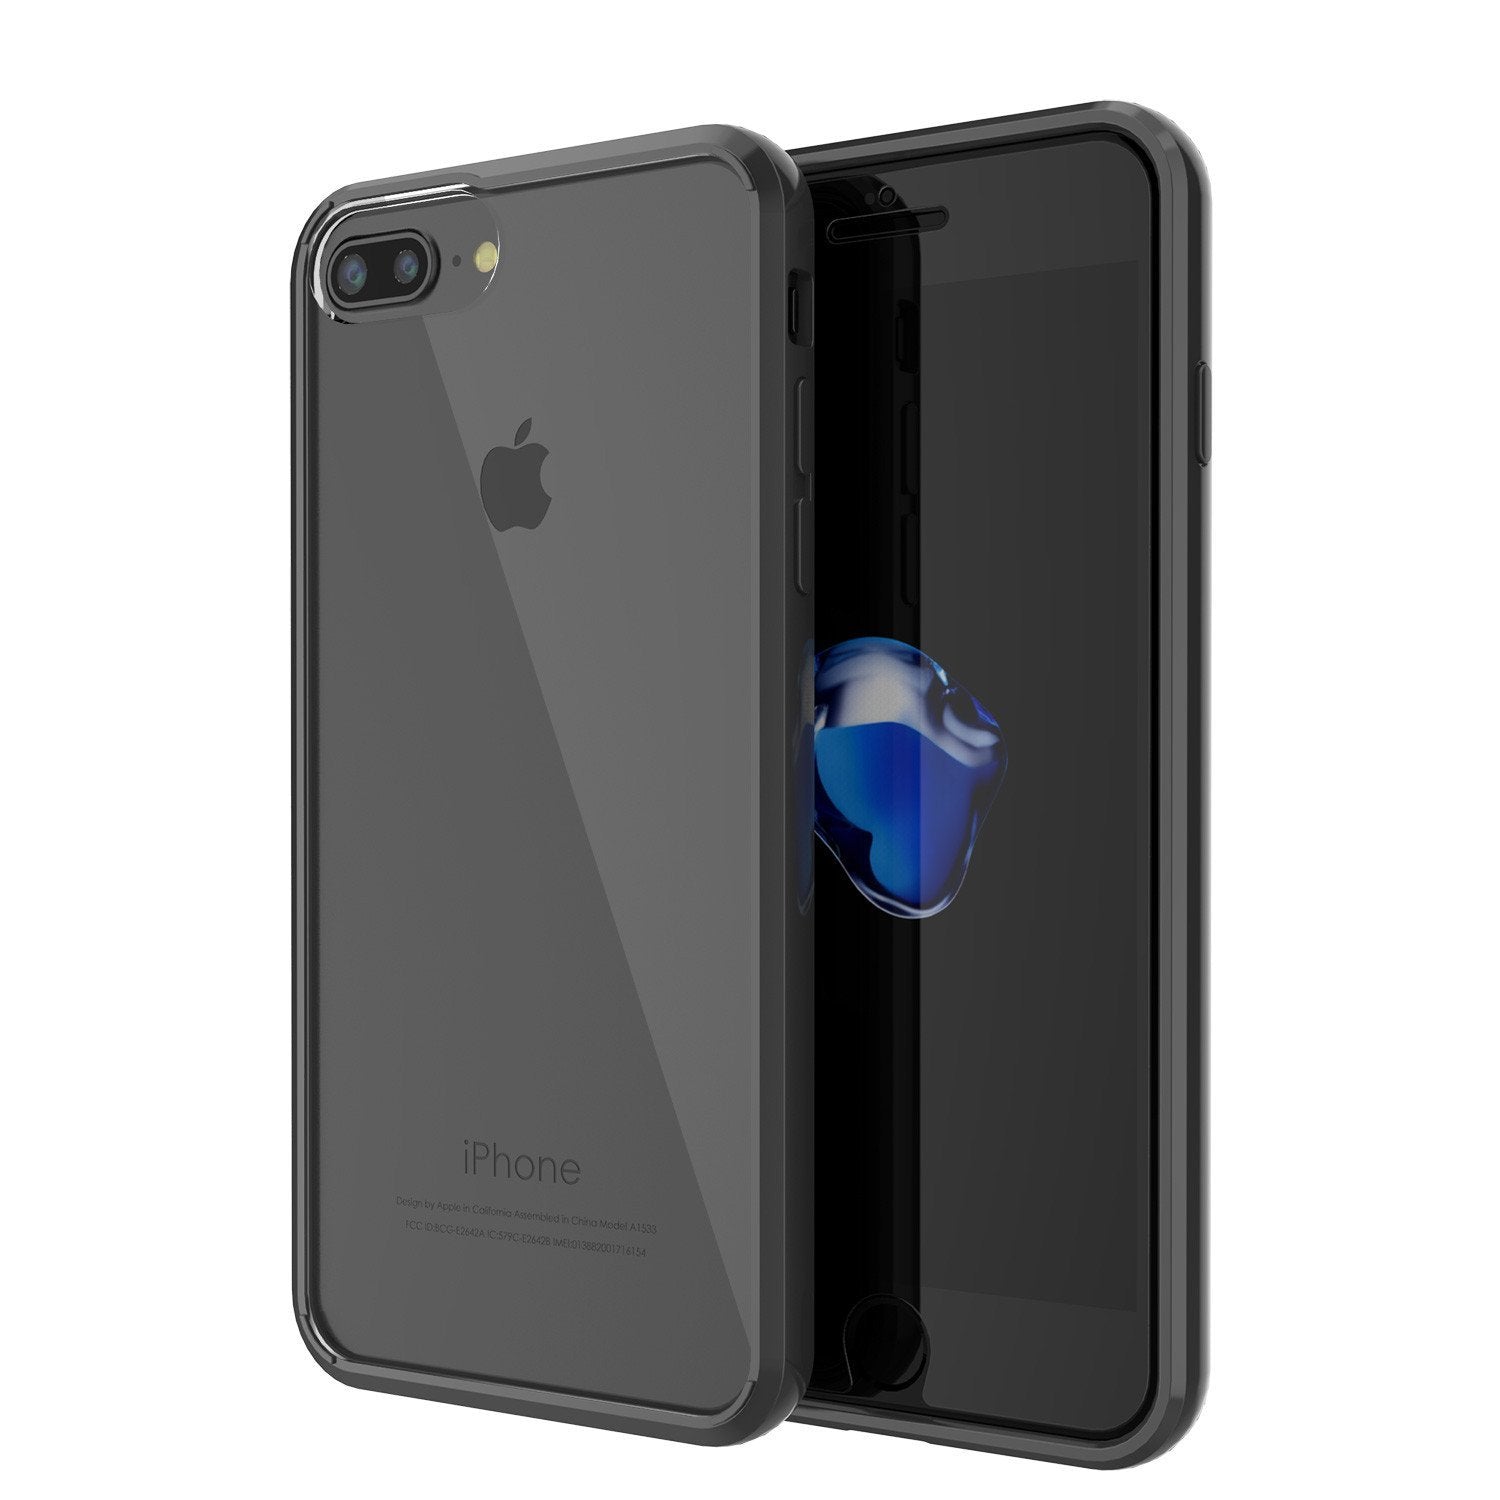 iPhone 8 Case Punkcase® LUCID 2.0 Black Series w/ PUNK SHIELD Screen Protector | Ultra Fit